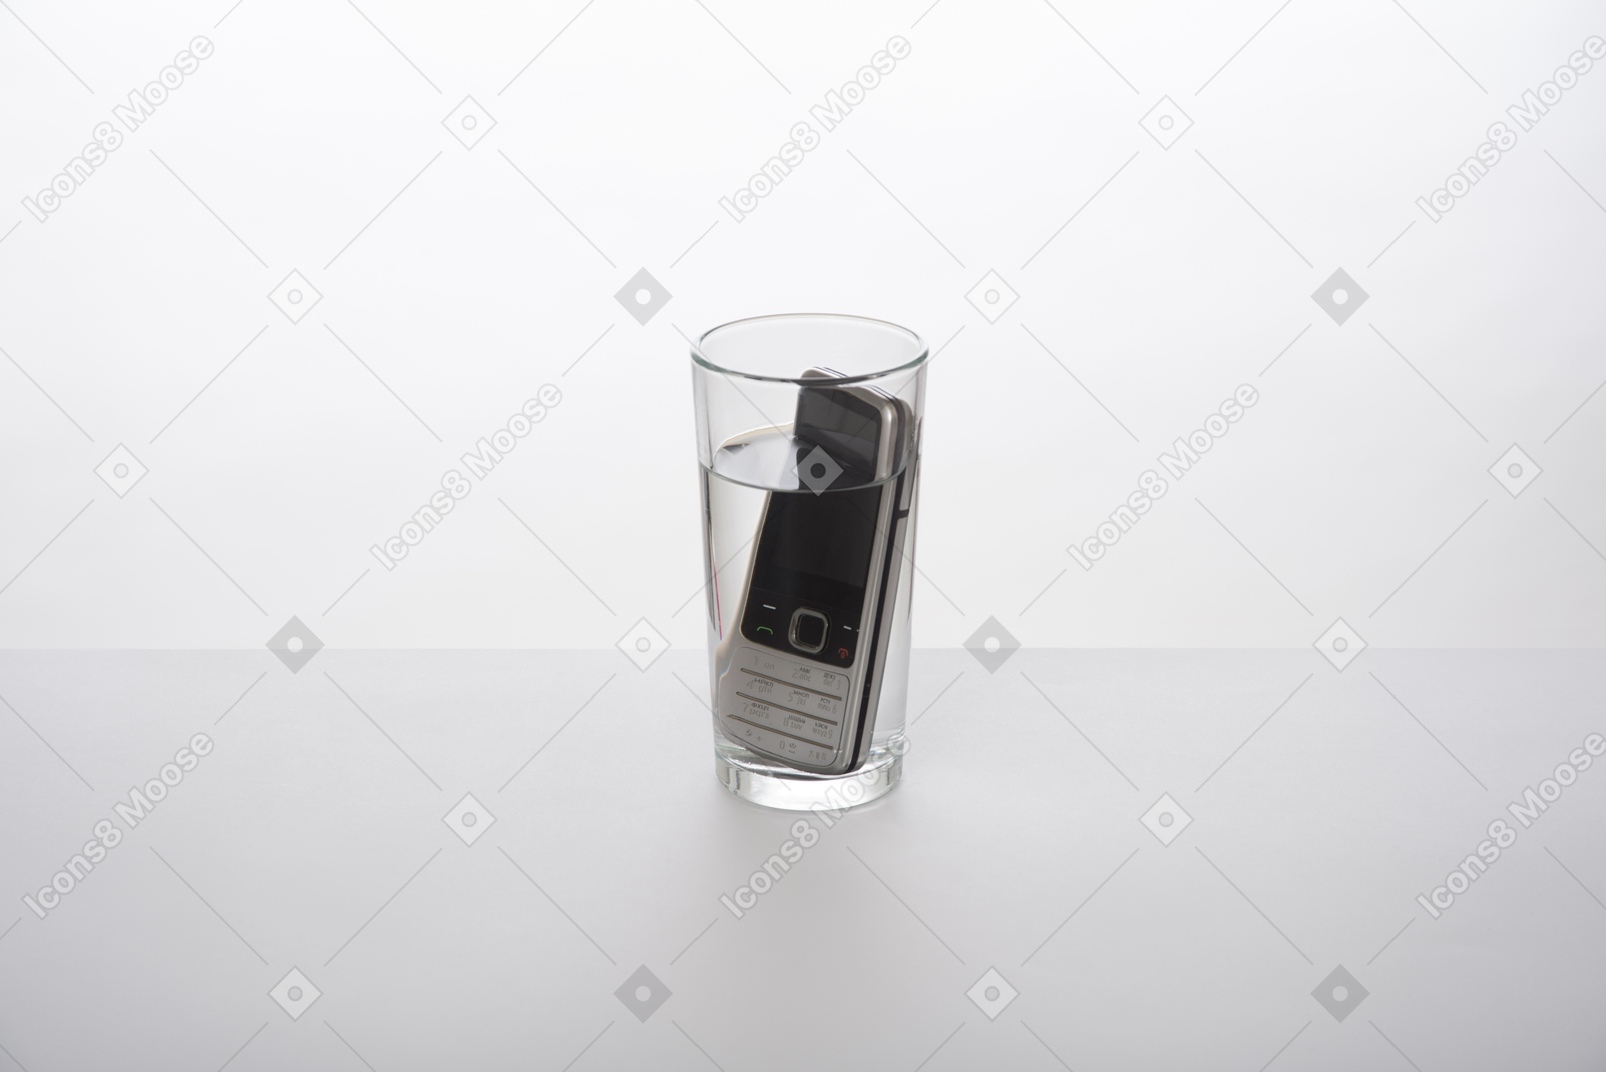 Cell phone in a glass of water